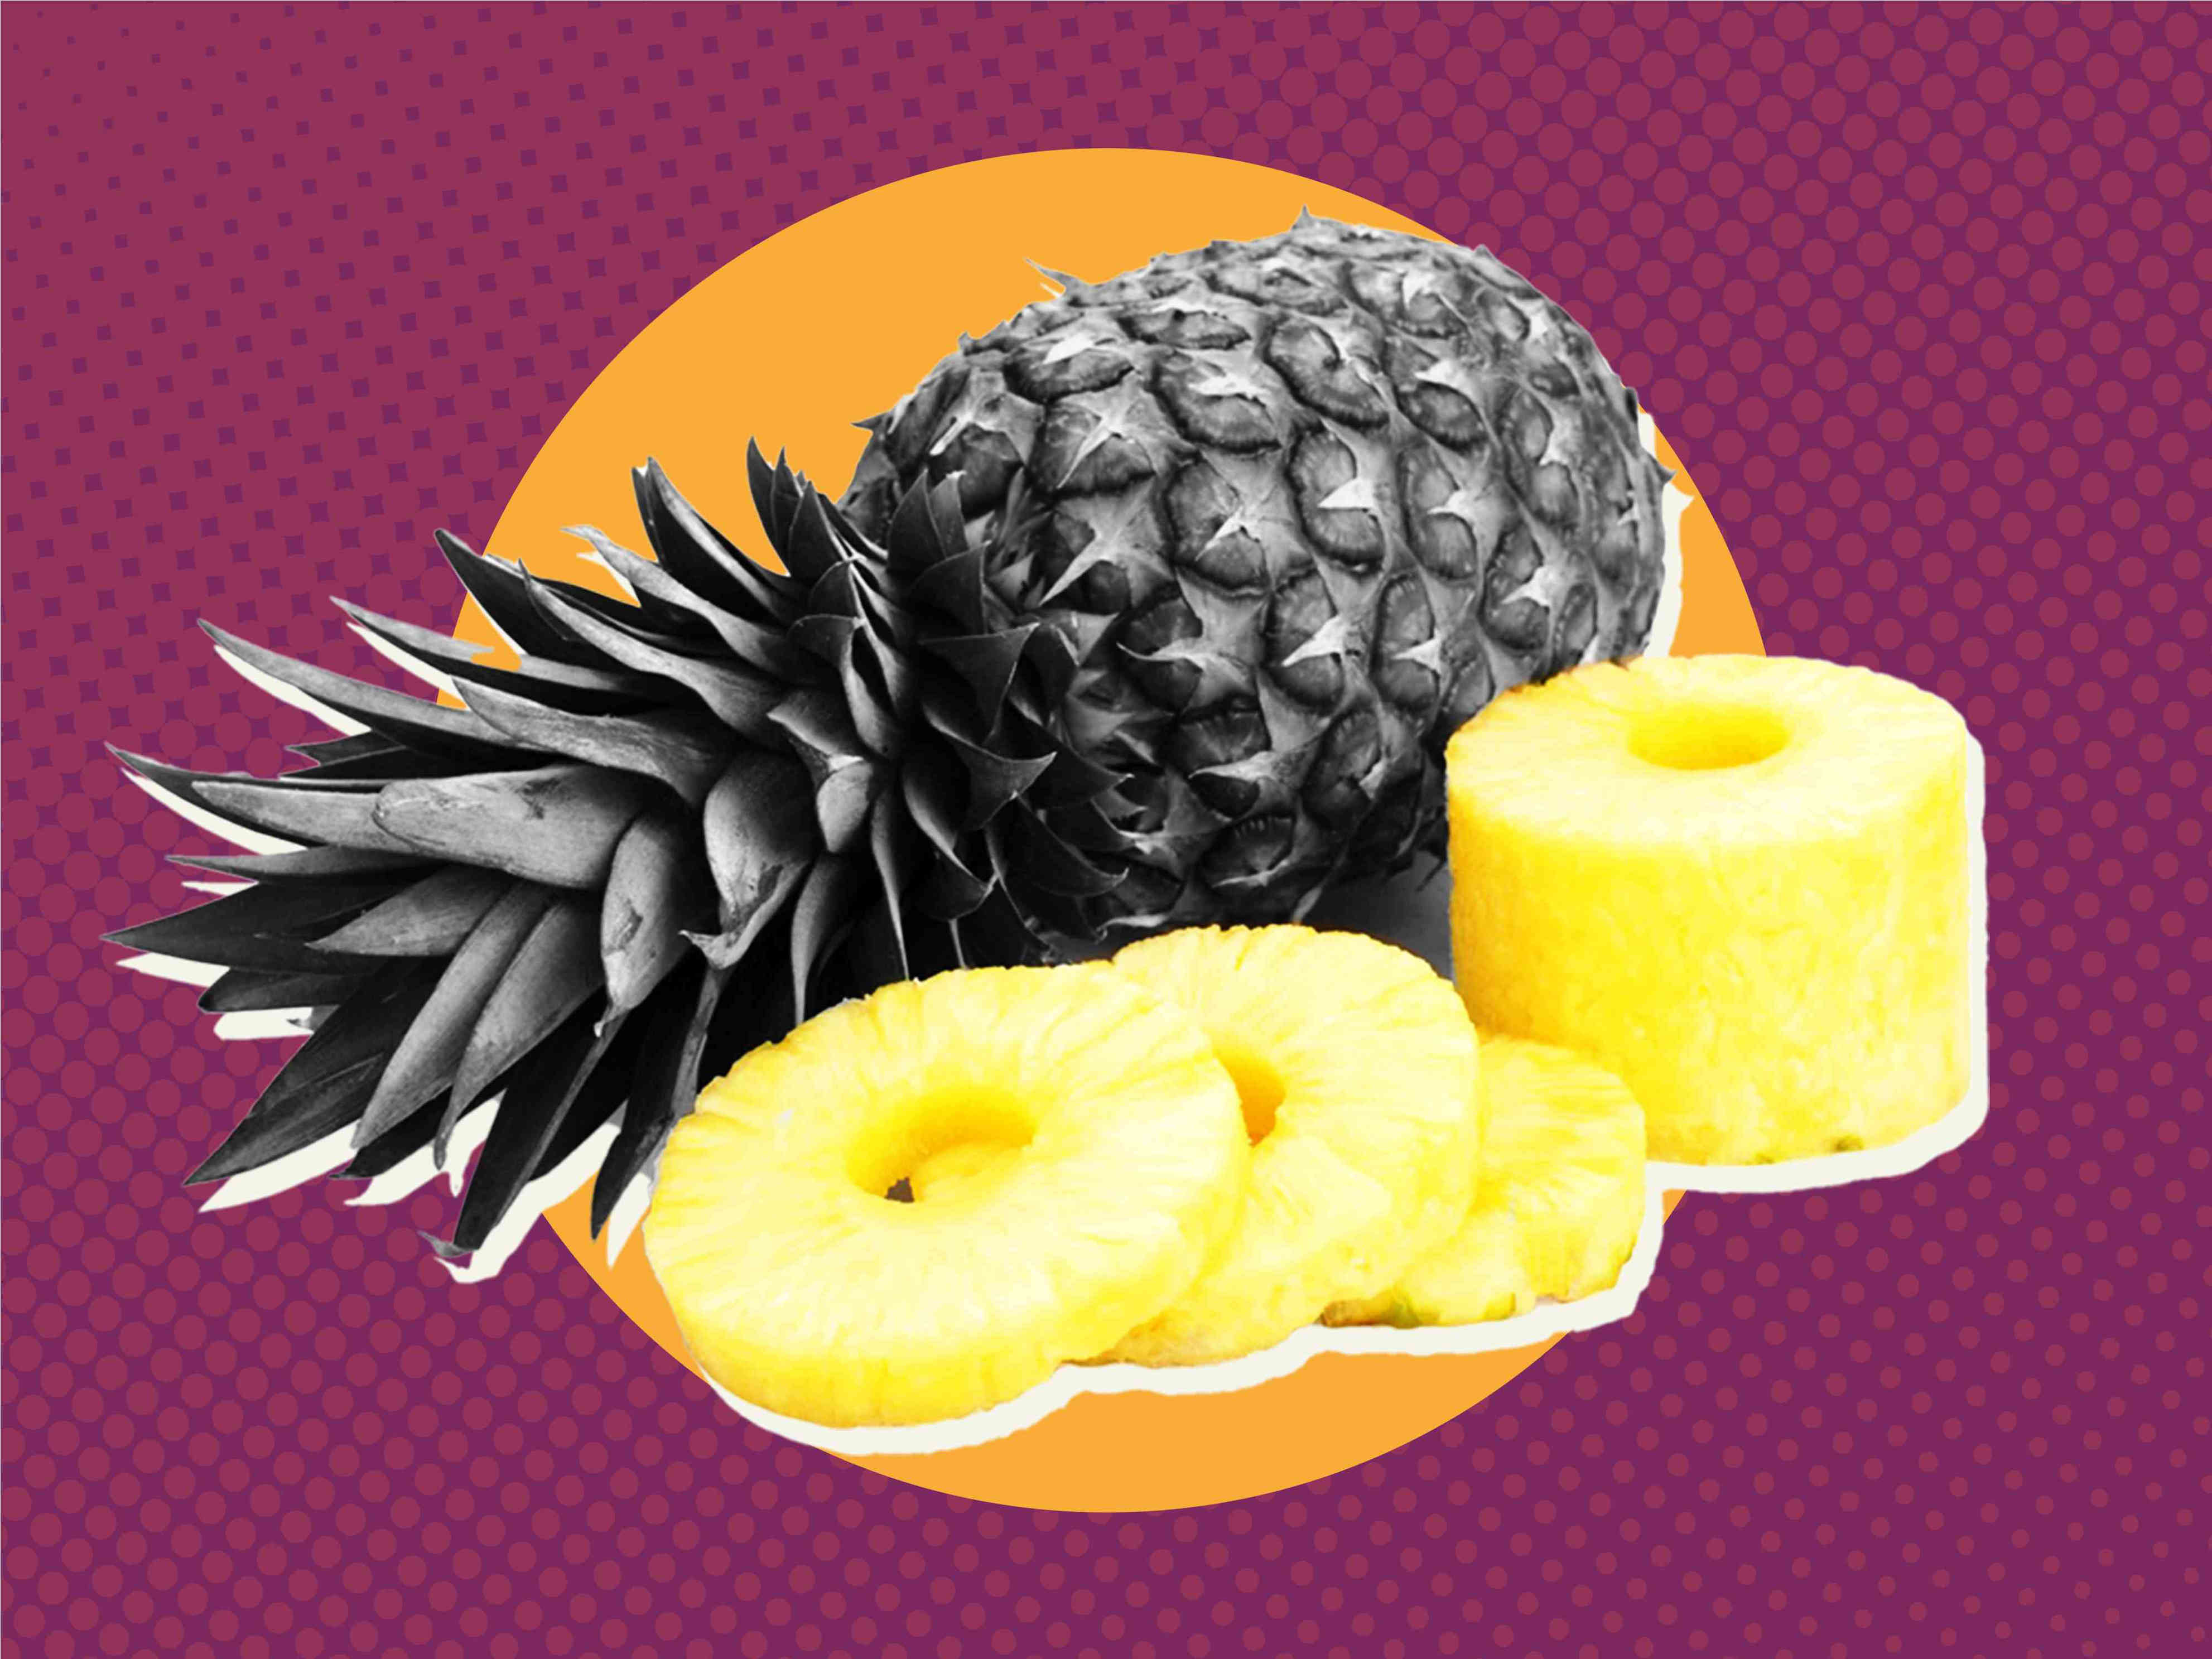 there’s a new pineapple in stores that took 15 years to develop